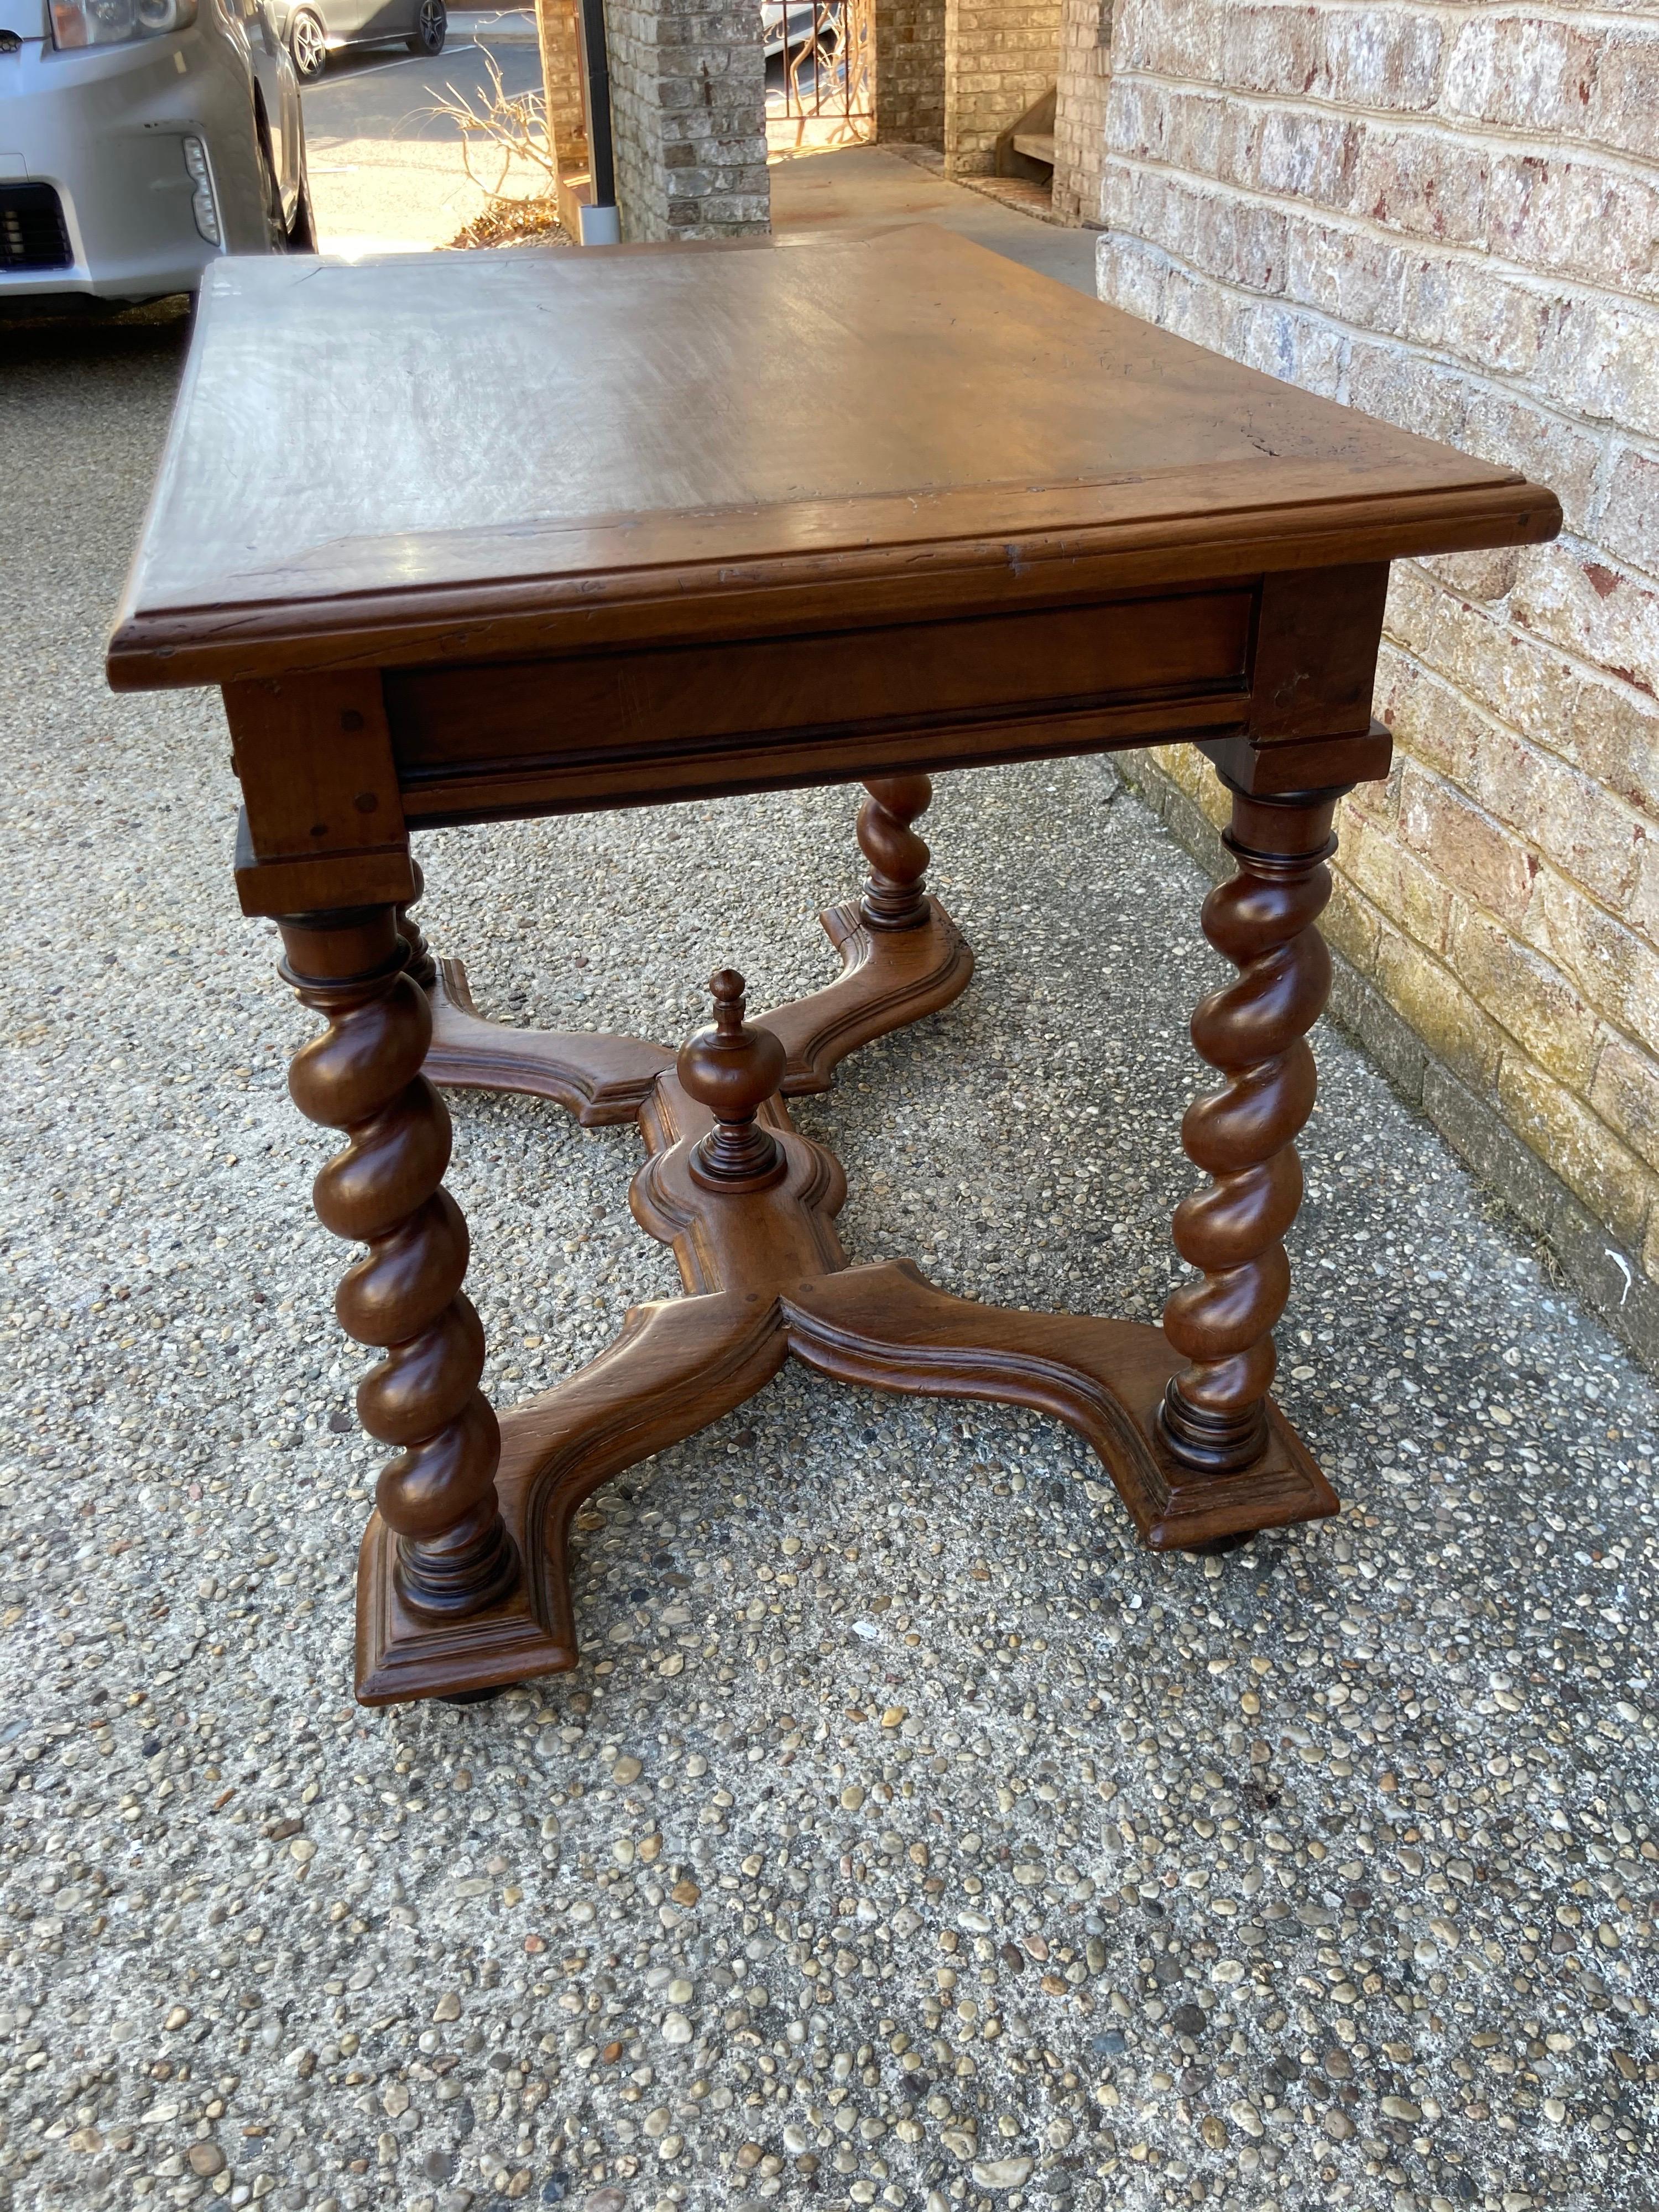 18th C. Walnut Table / Desk with Twisted Legs In Good Condition For Sale In East Hampton, NY